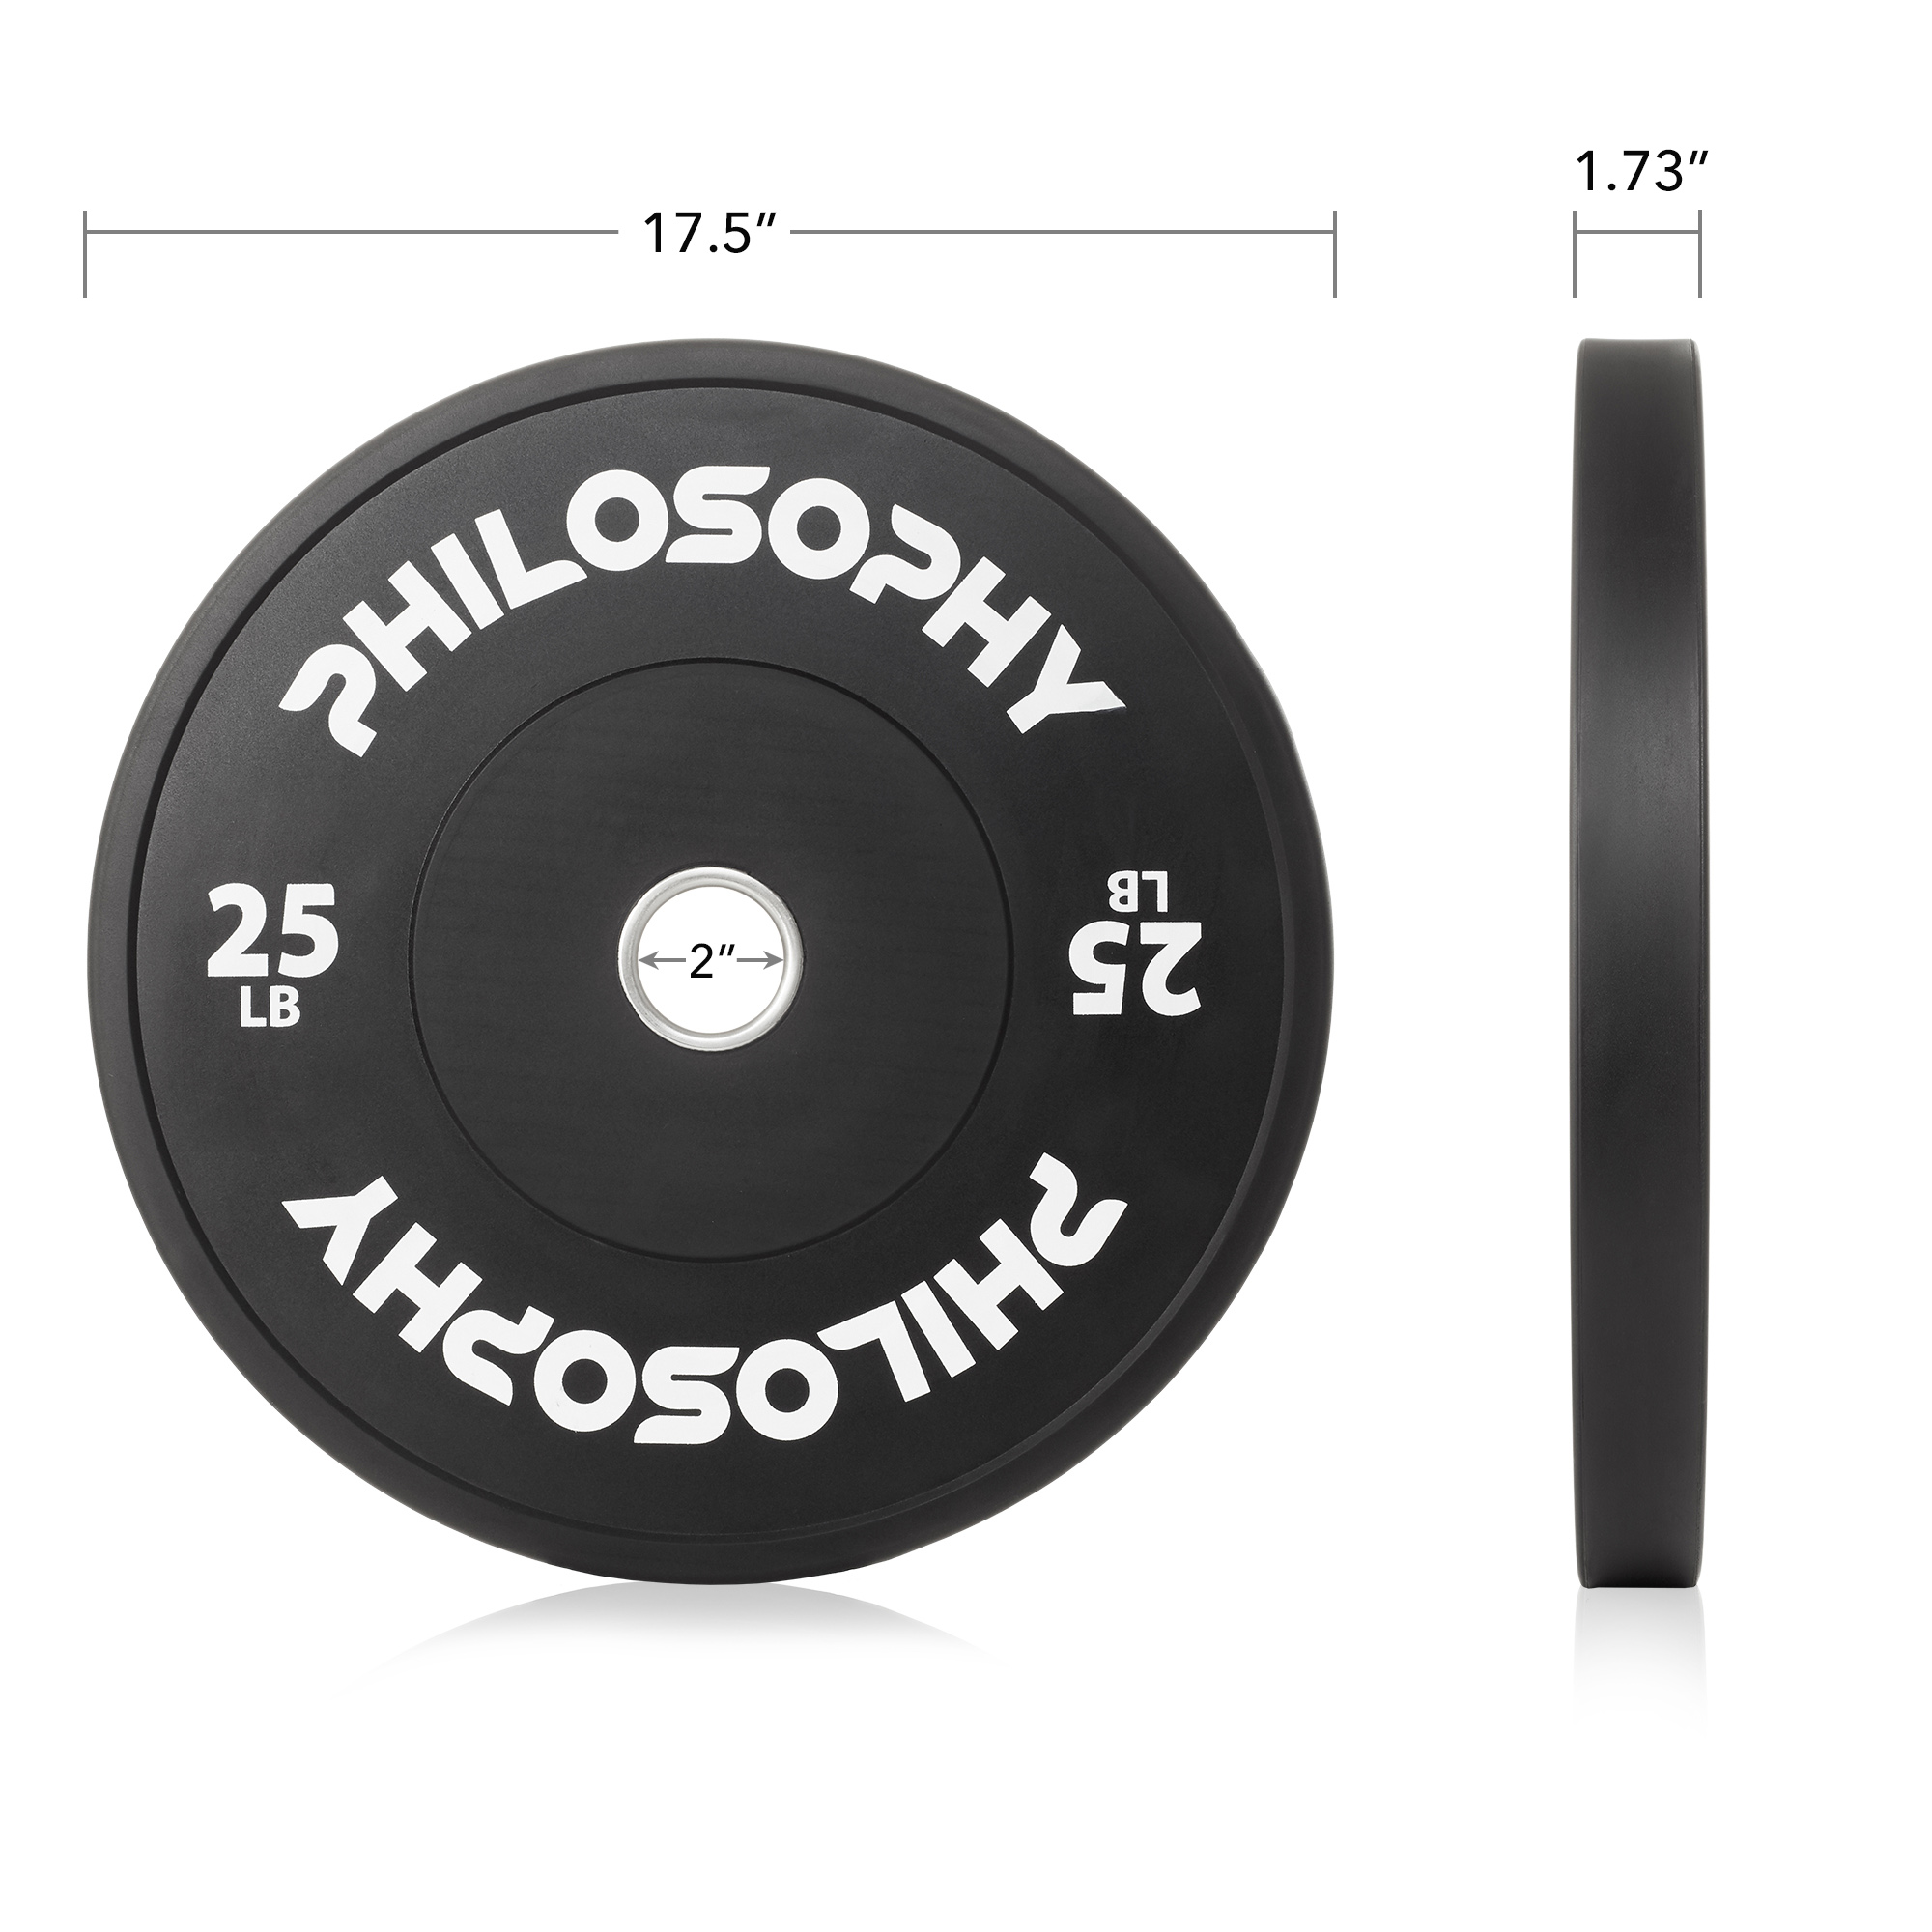 Philosophy Gym Set of 2 Olympic 2-Inch Rubber Bumper Plates (25 LB each) Black